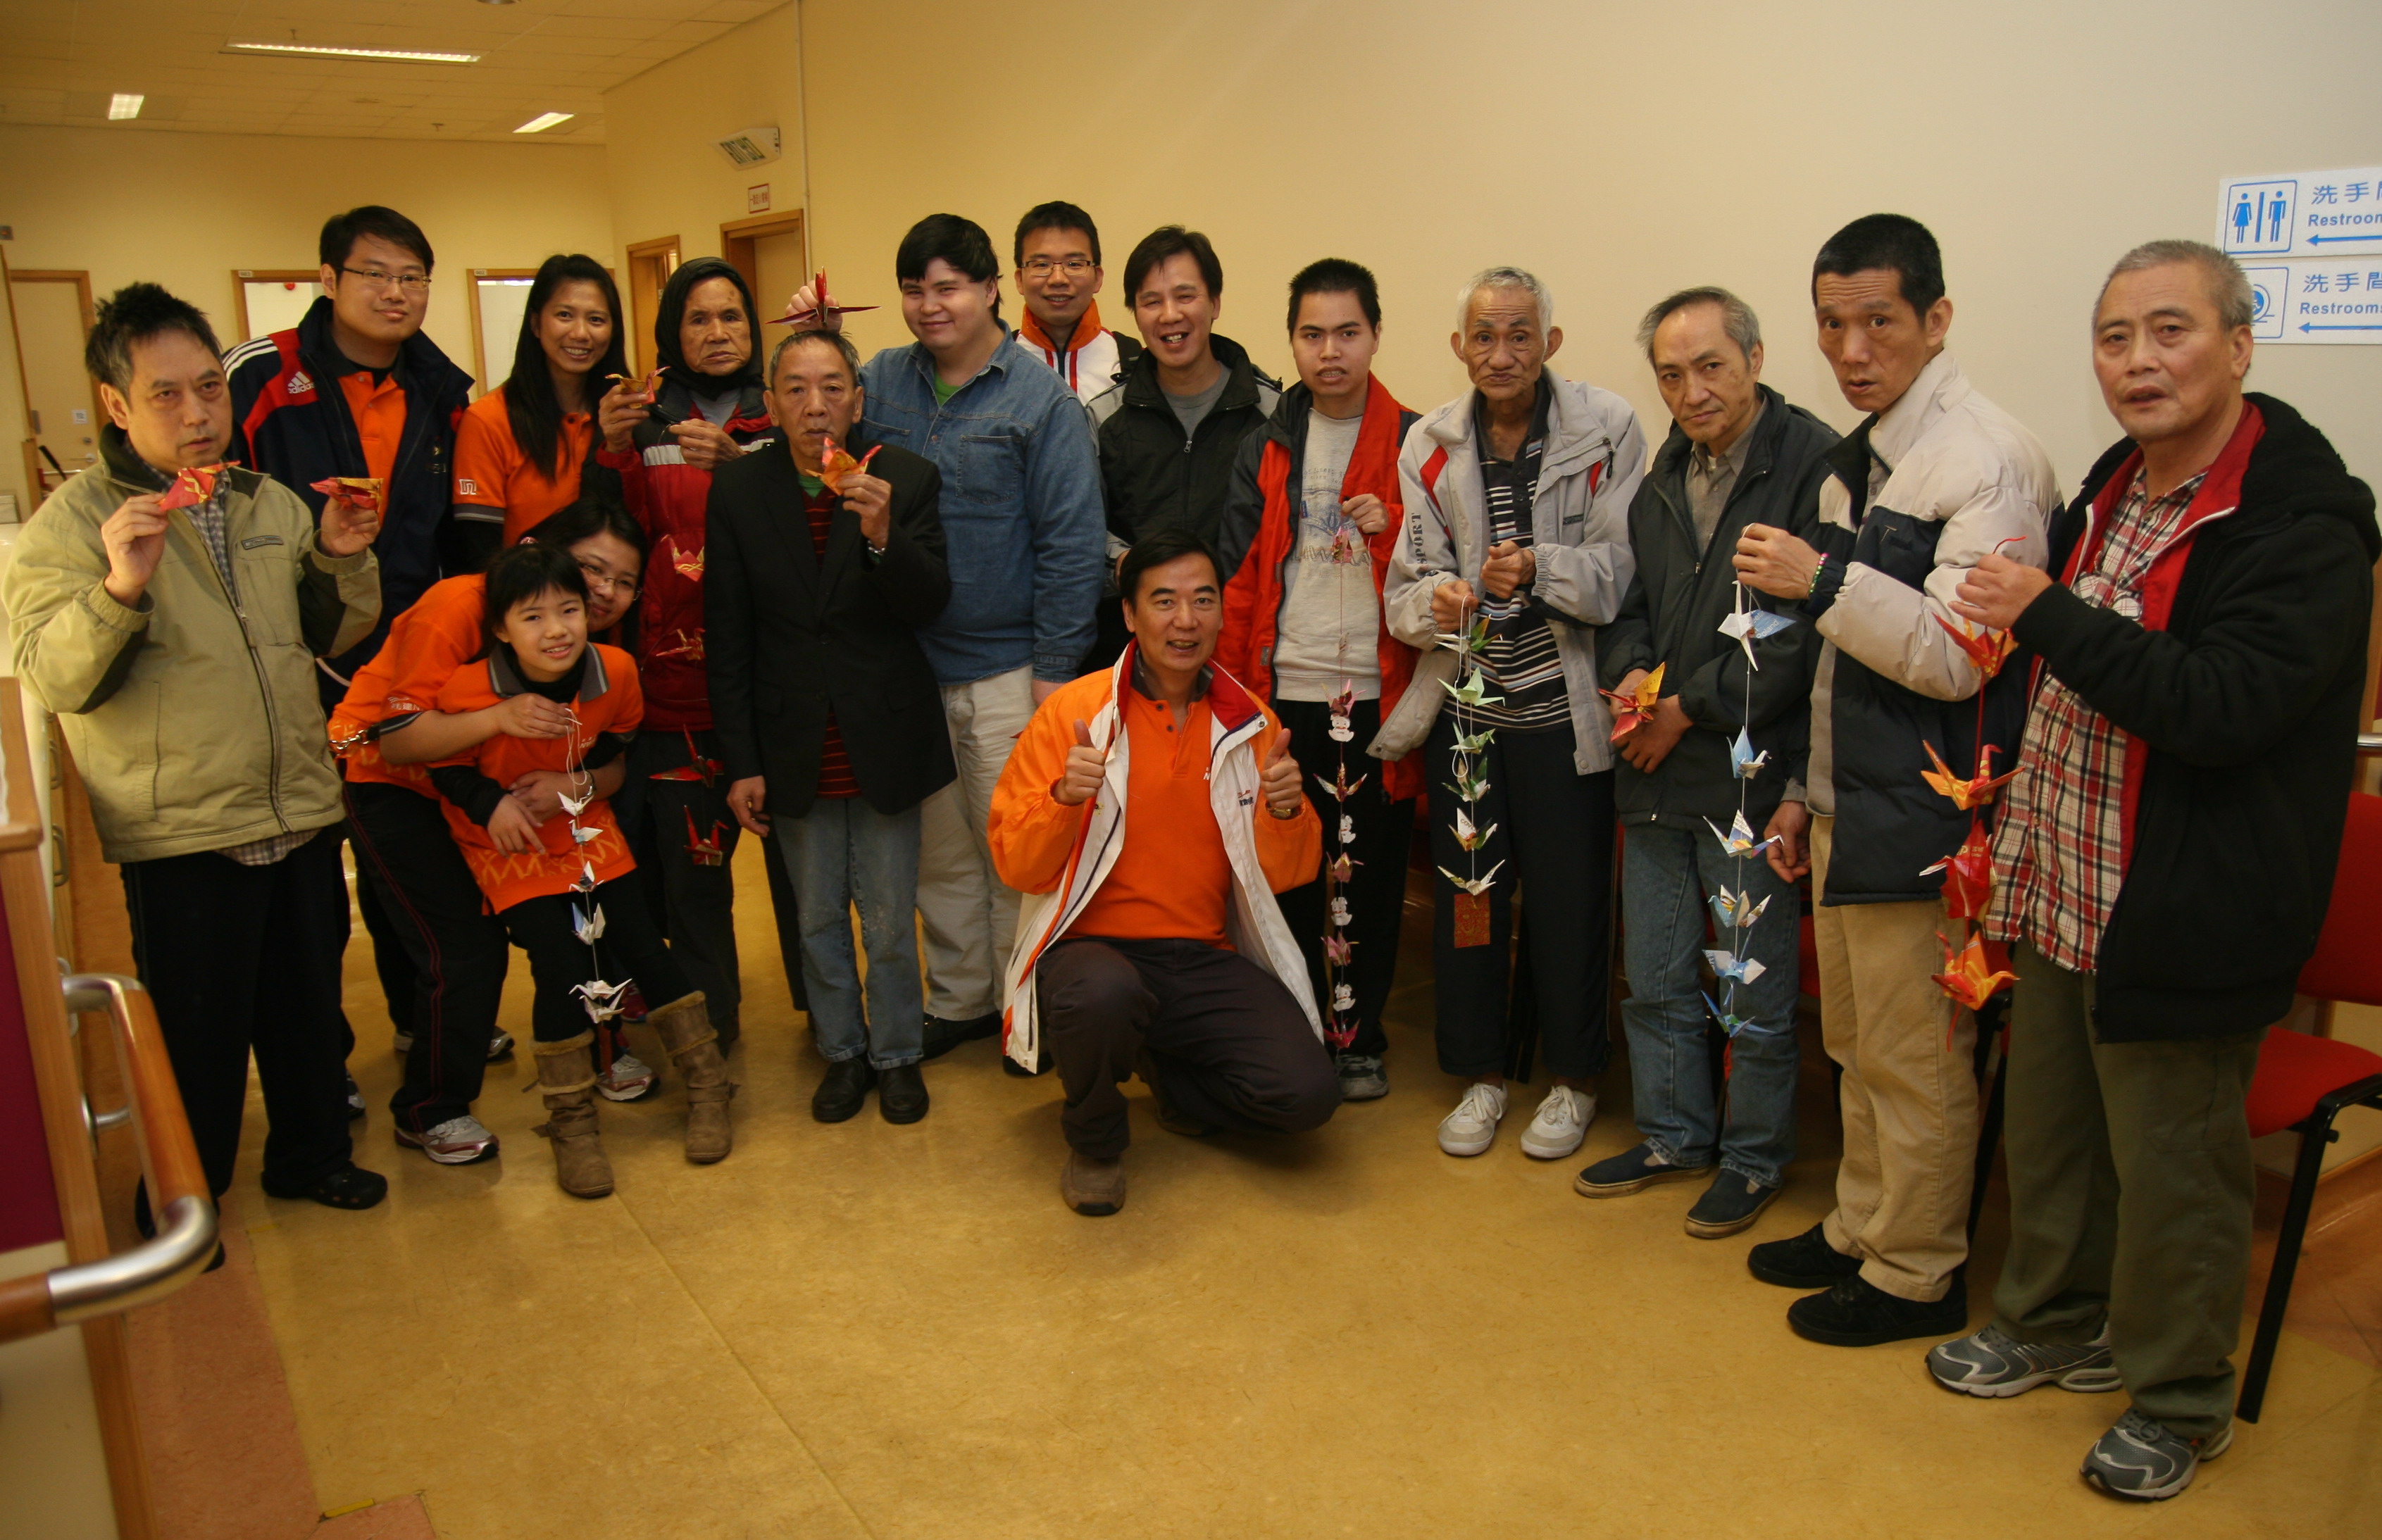 NWS Holdings celebrated Chinese New Year with psychiatric rehabilitants 